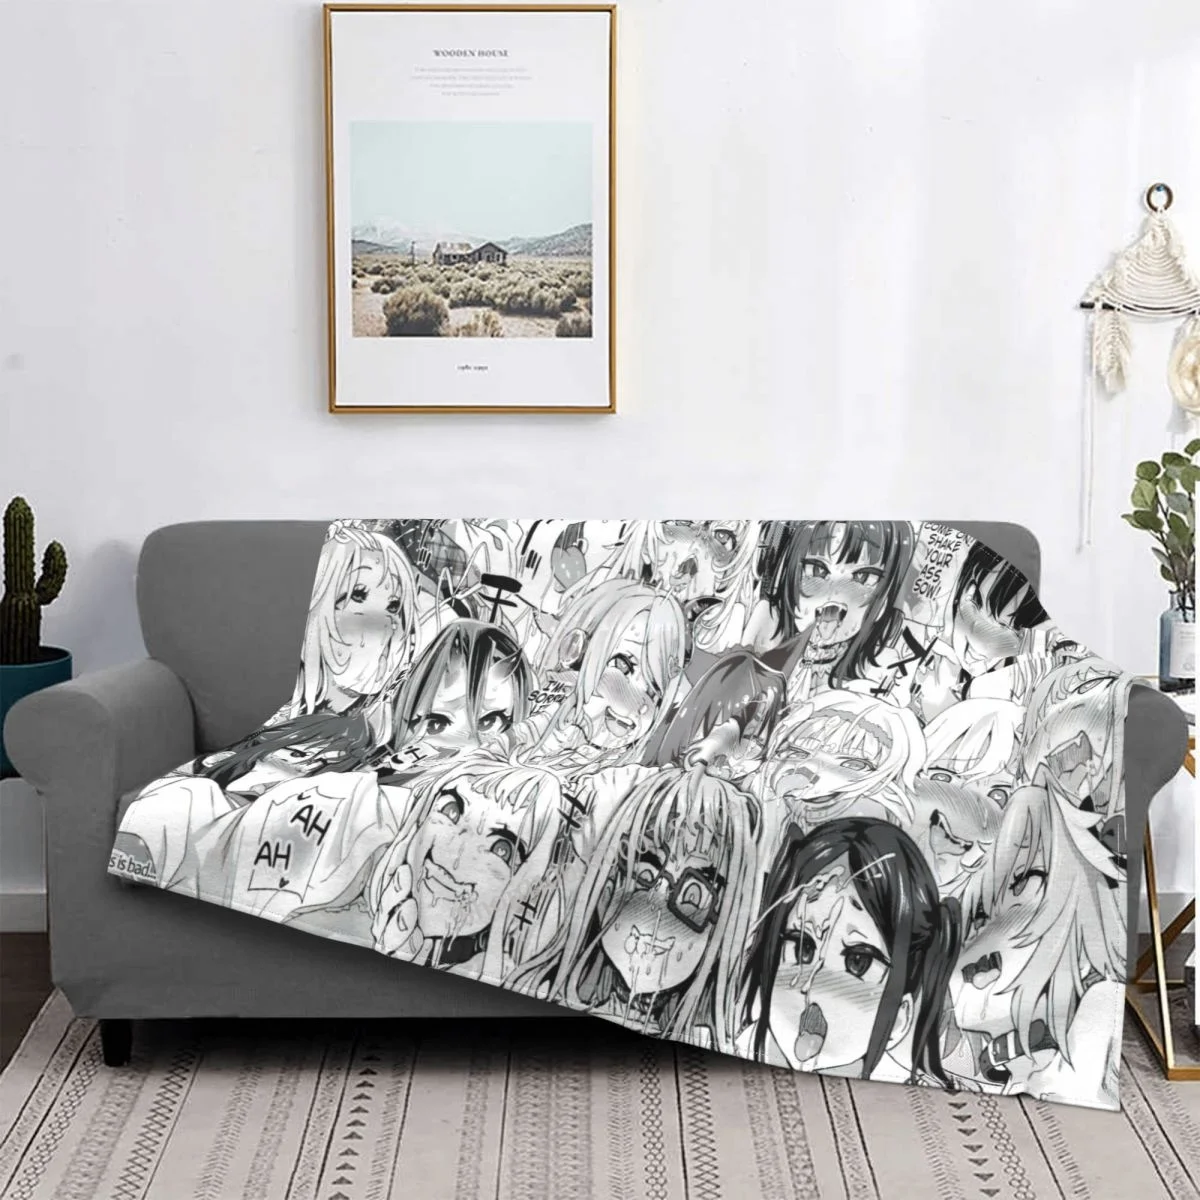 2 Size Ahegao Blanket High Quality Flannel Warm Soft Plush On The Sofa Bed Blanket Suitable Throw Blanket 3D printed sofa